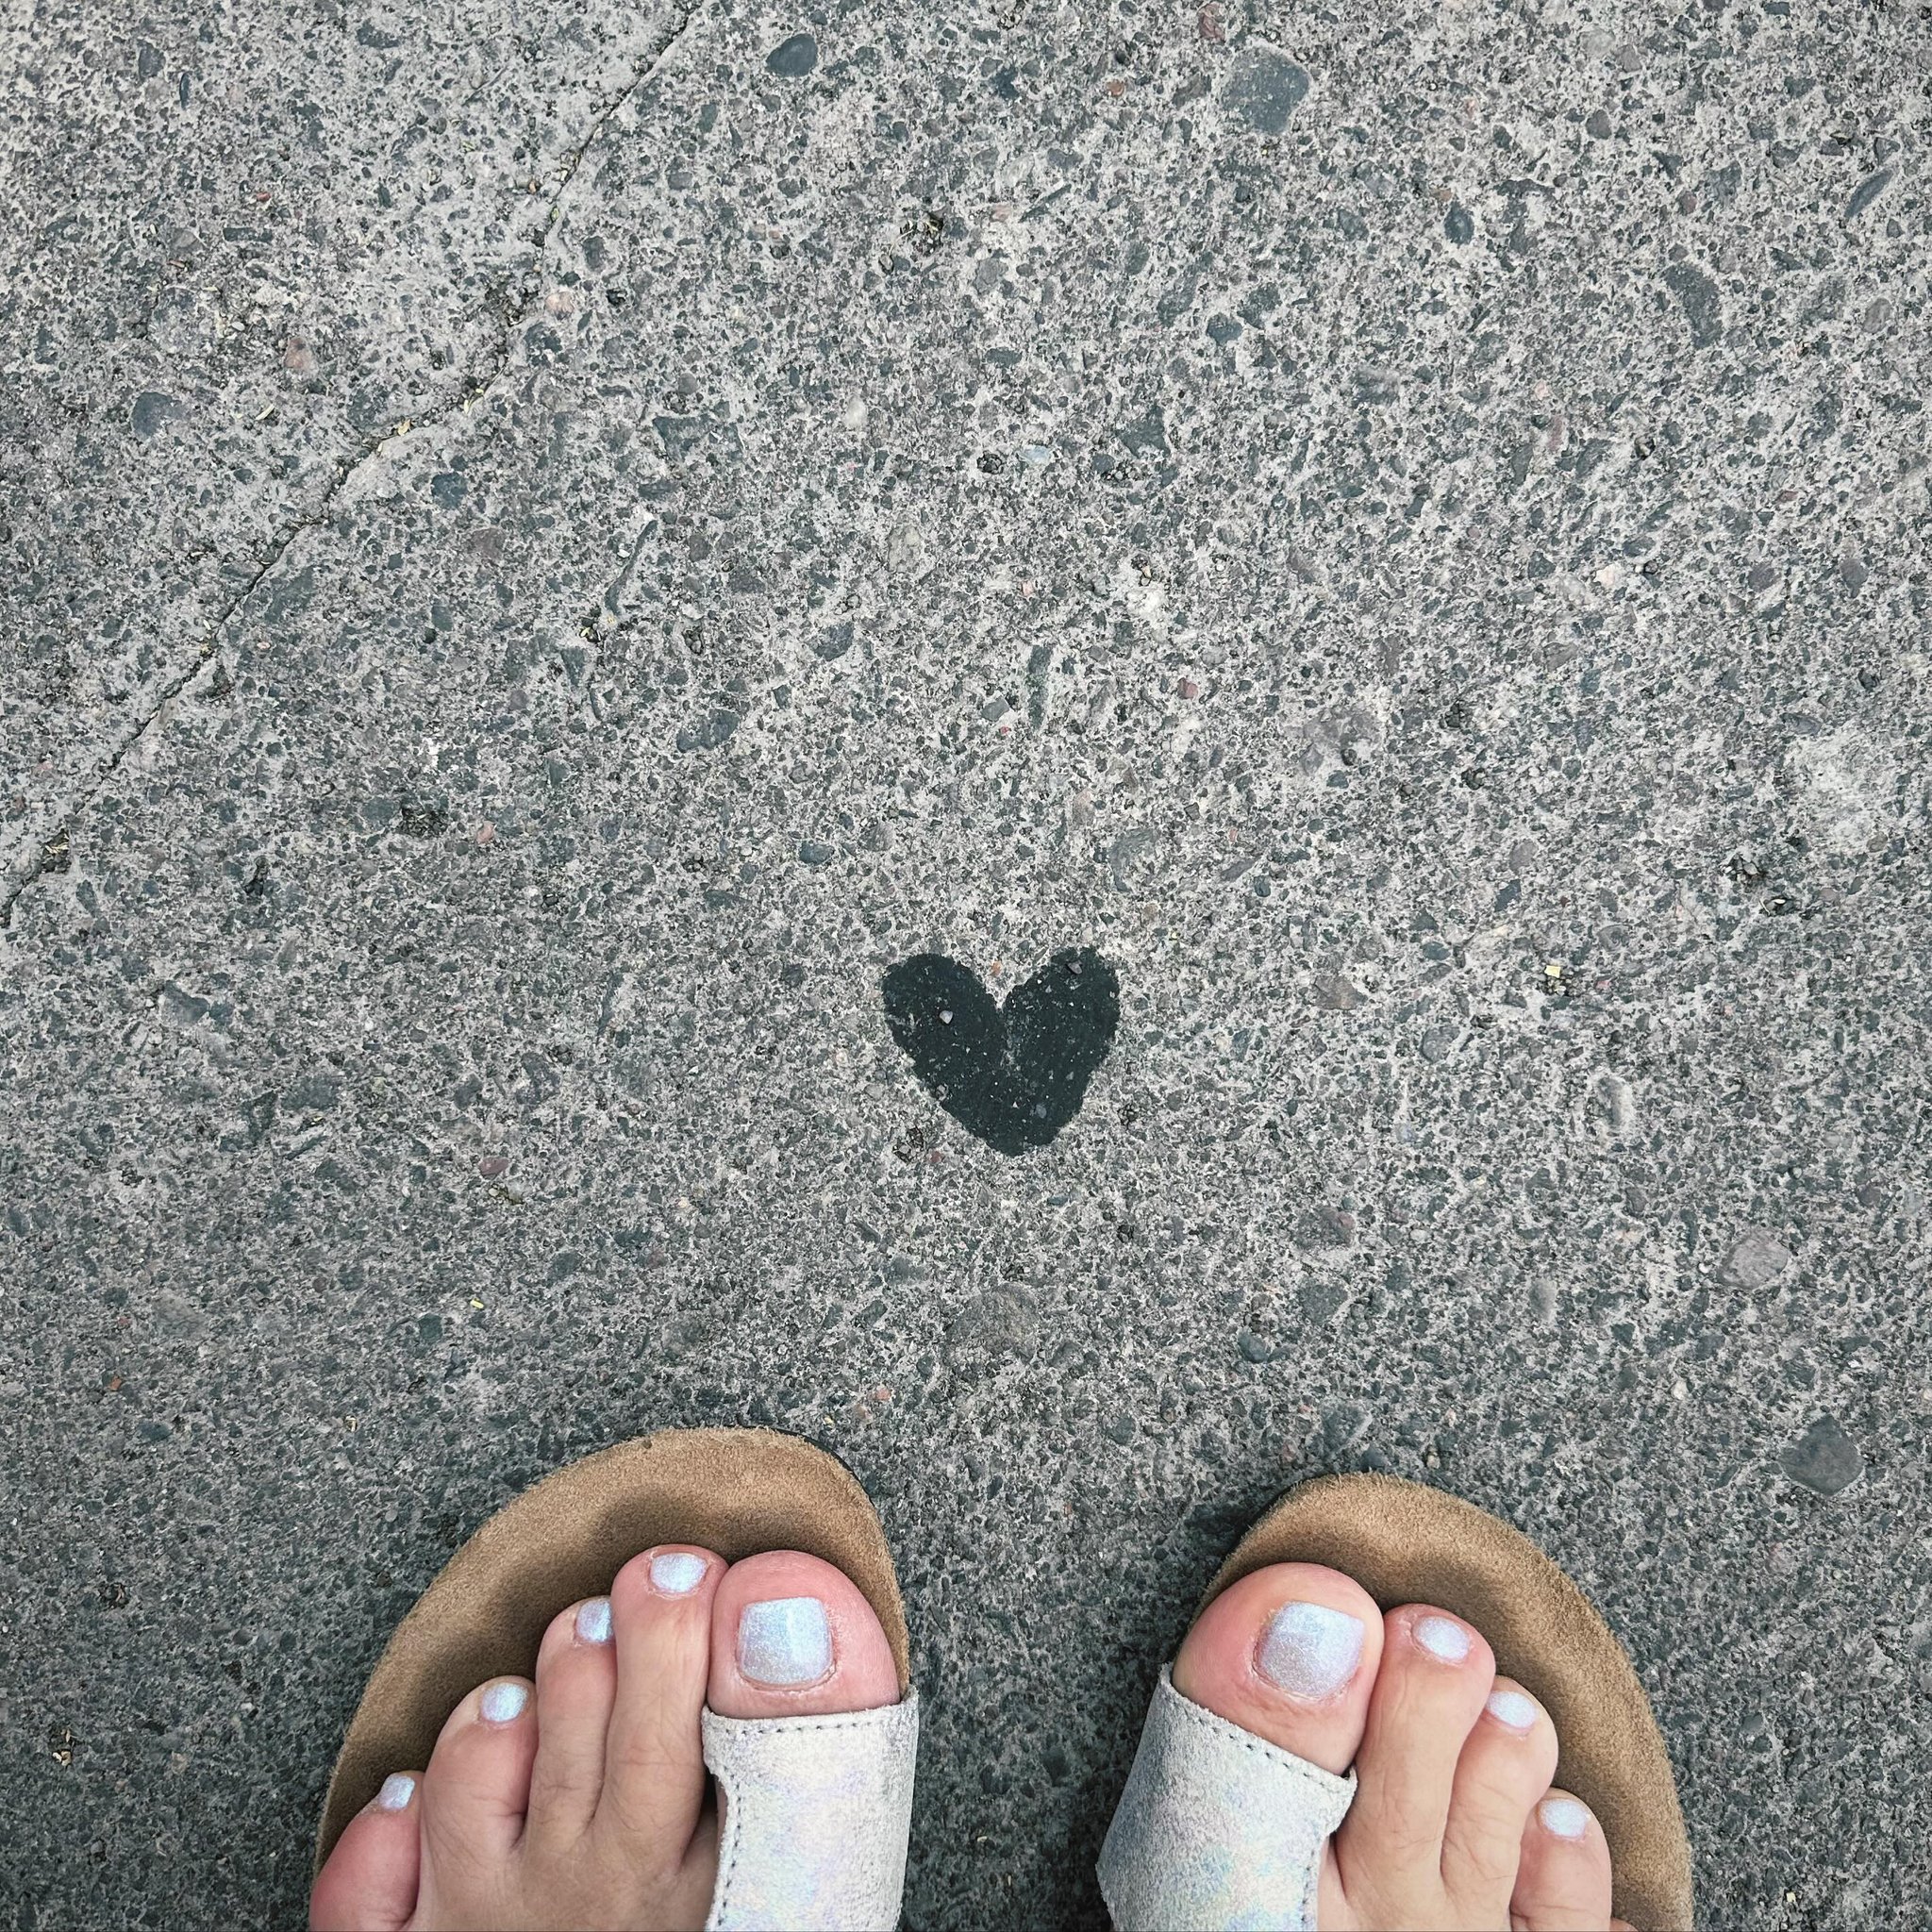 💖 Hearts appear everywhere for me&hellip;even oil stains in the road. 

Every time I see a heart, I make a mental note of what I was saying or thinking about when it appeared because they are a confirmation for me. Synchronicity. 

Same with the num